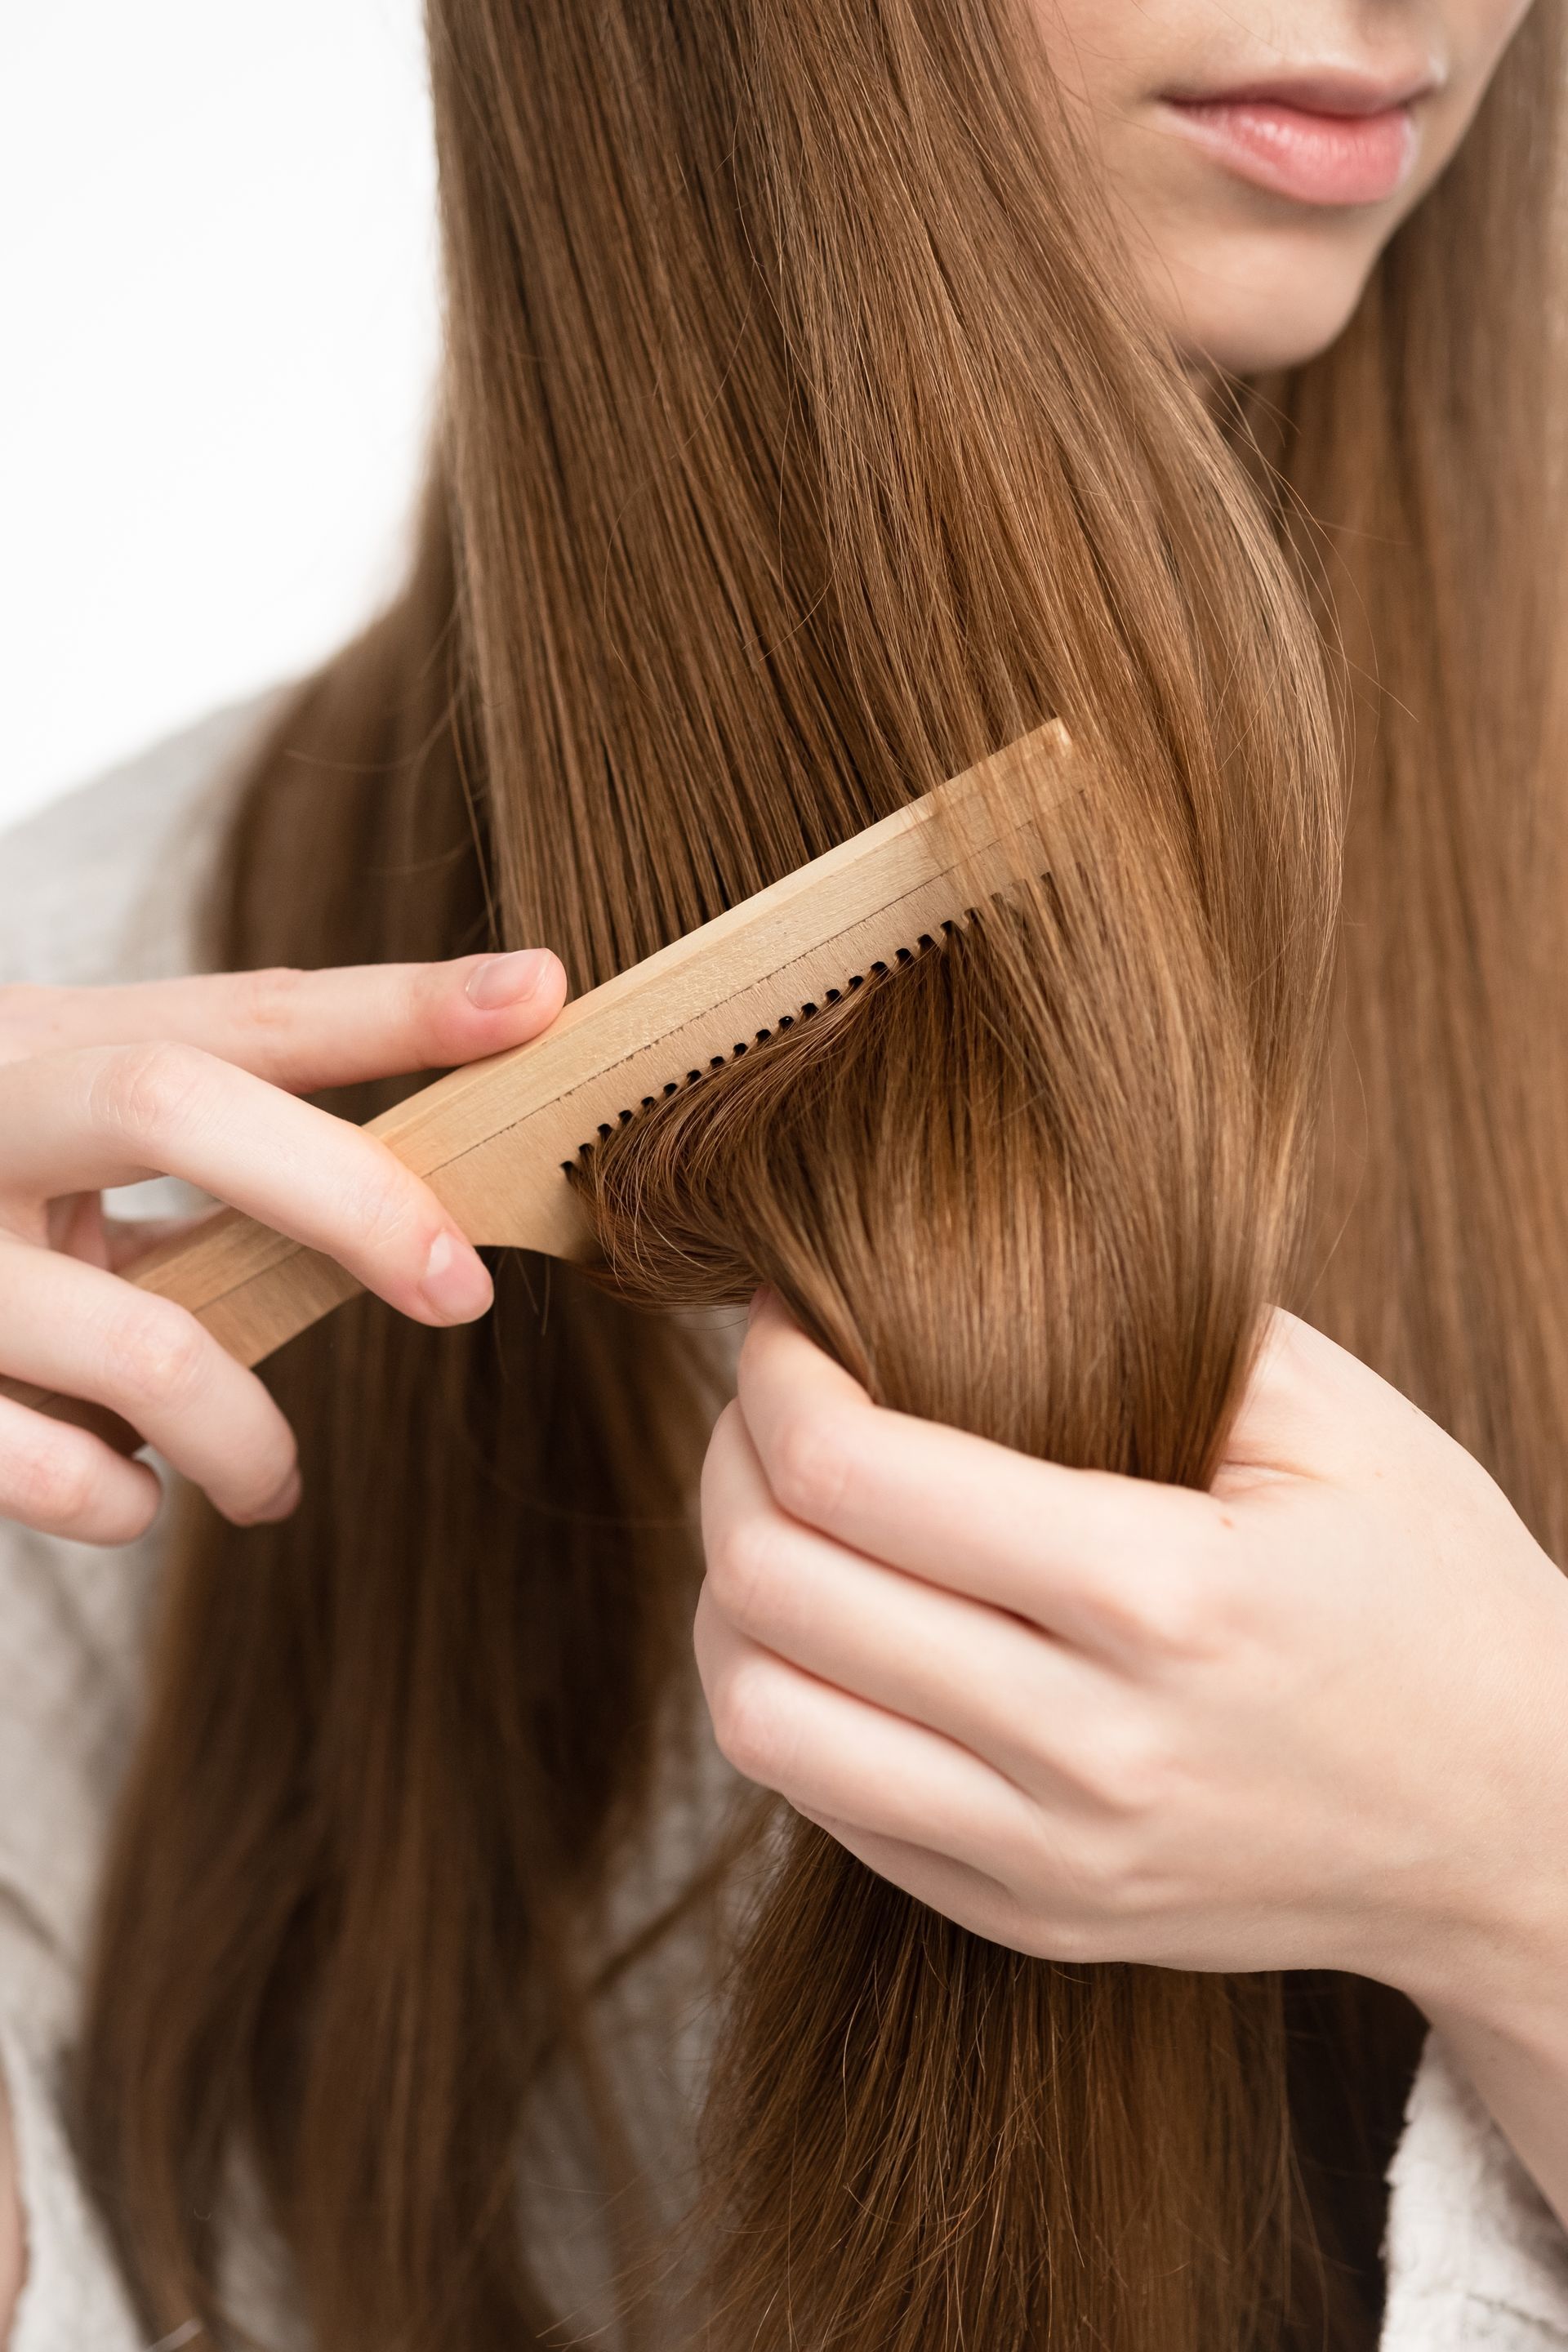 A woman is brushing her hair with a wooden comb.